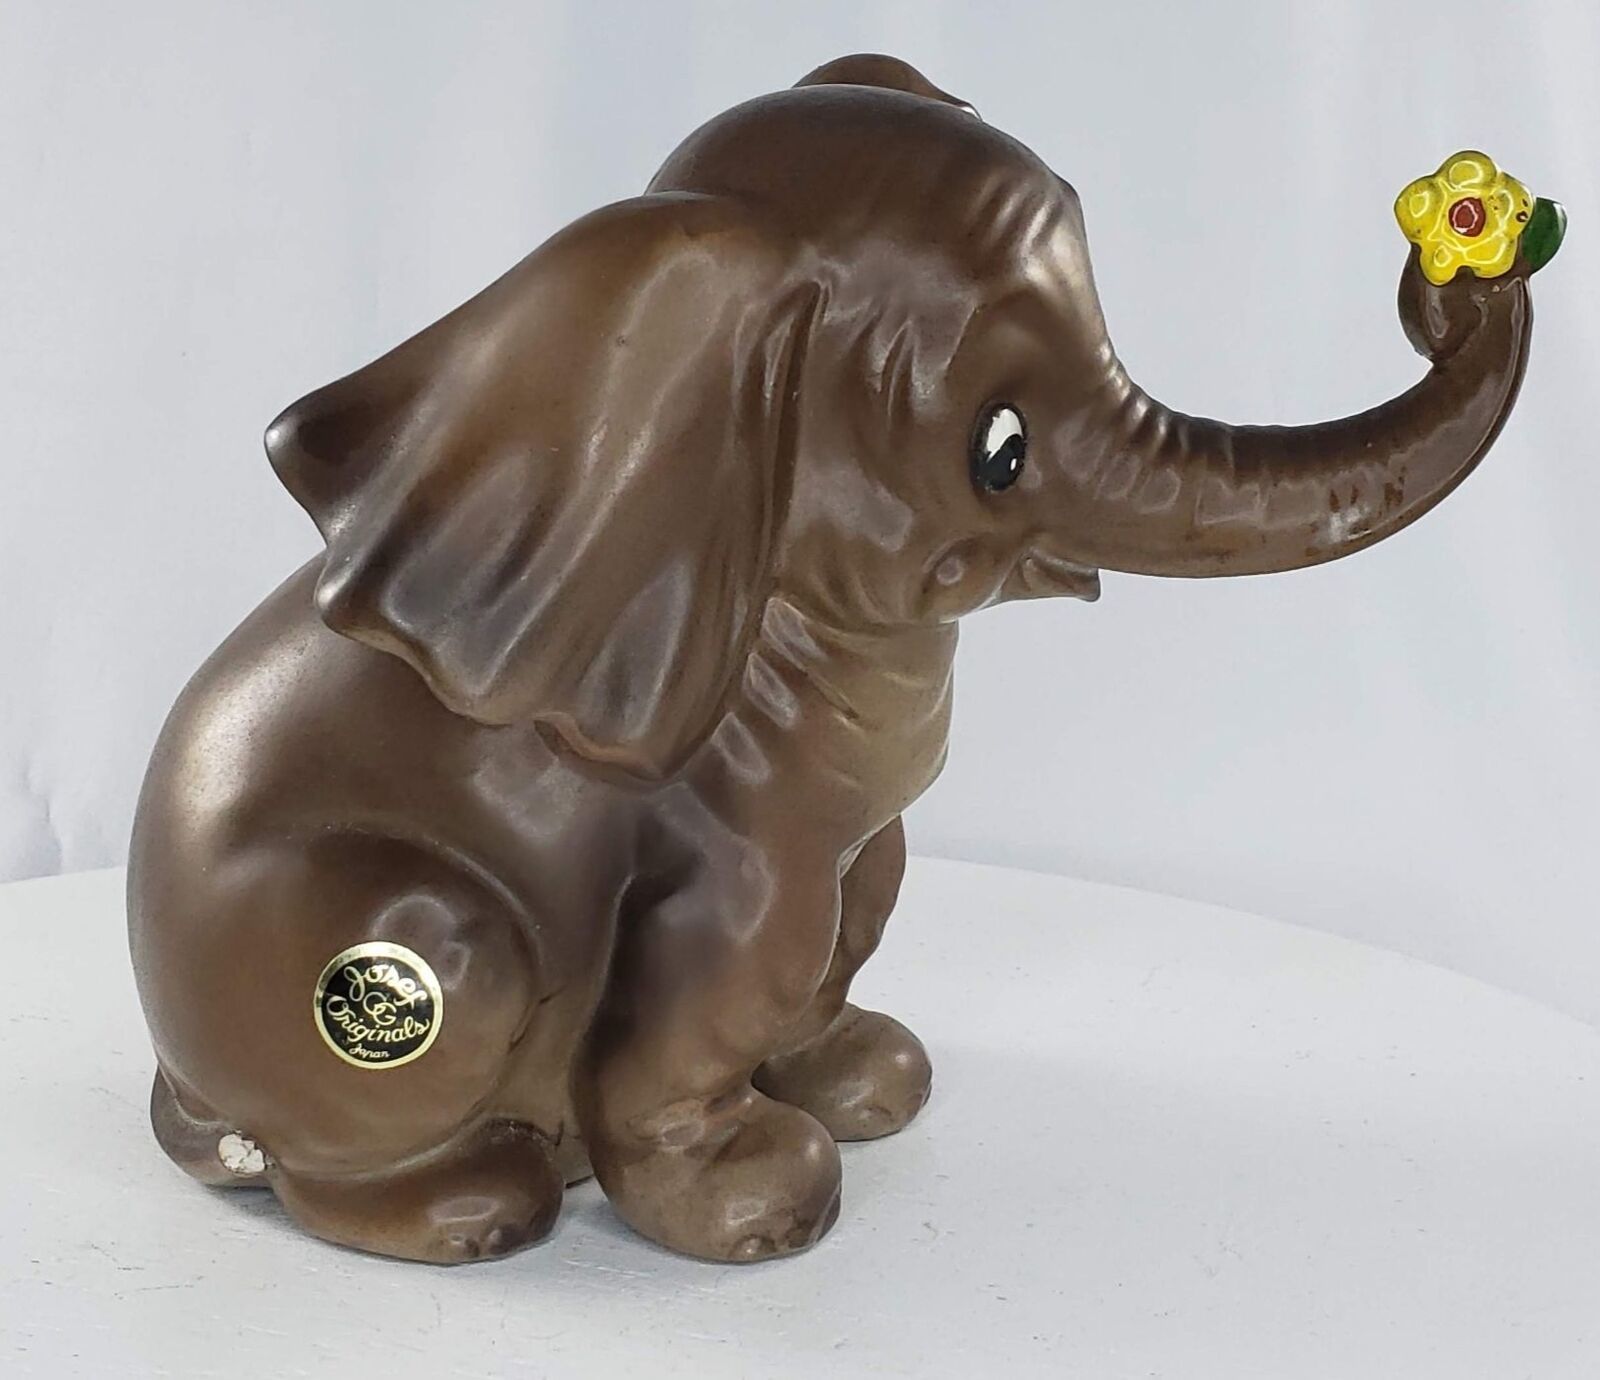 Primary image for Josef Originals Large Elephant Sitting with Flower Figurine